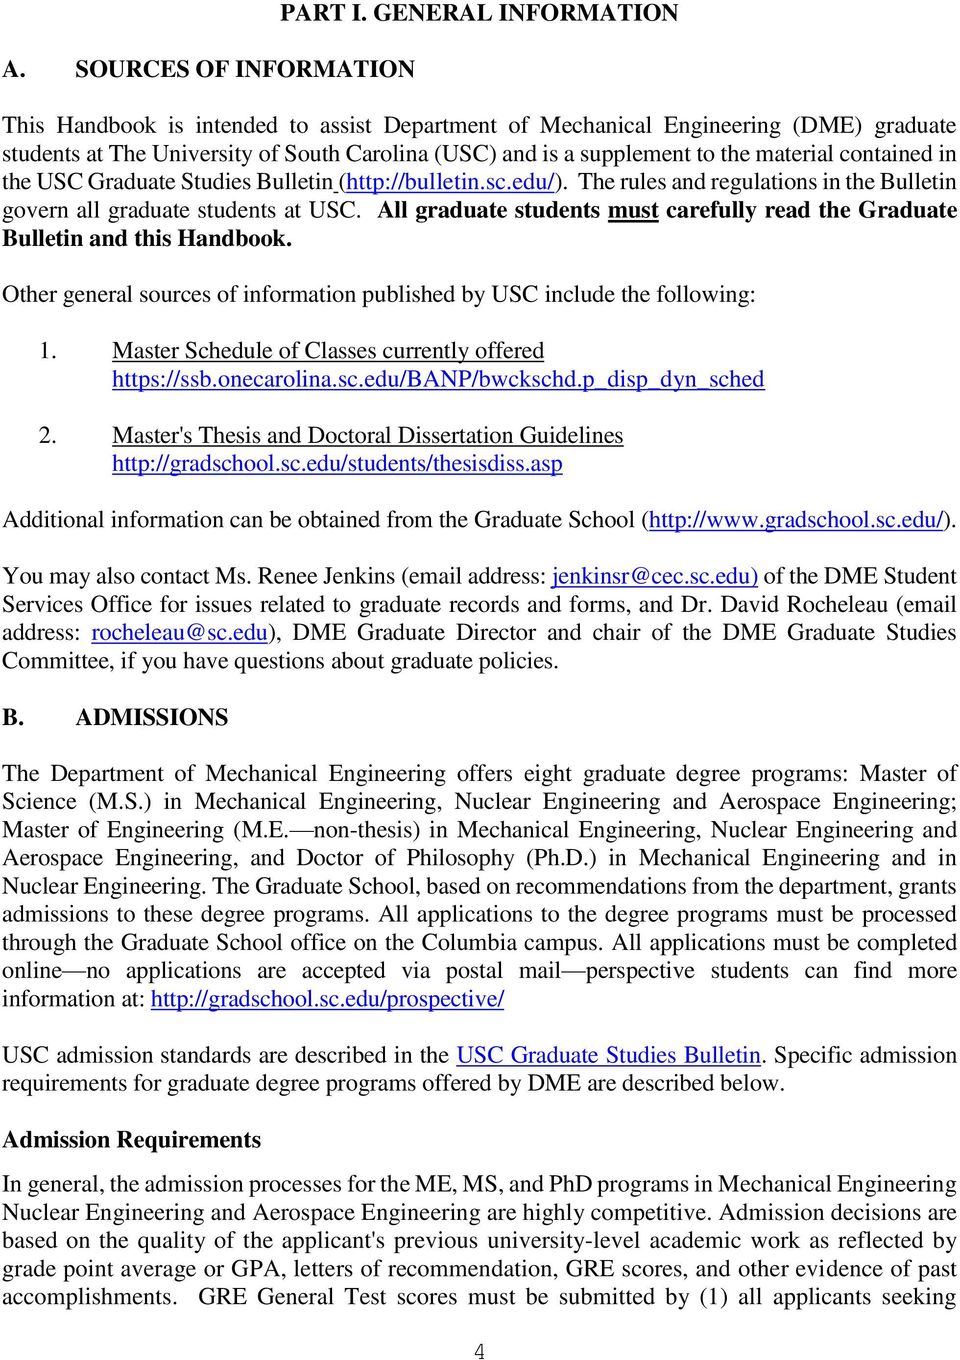 contained in the USC Graduate Studies Bulletin (http://bulletin.sc.edu/). The rules and regulations in the Bulletin govern all graduate students at USC.